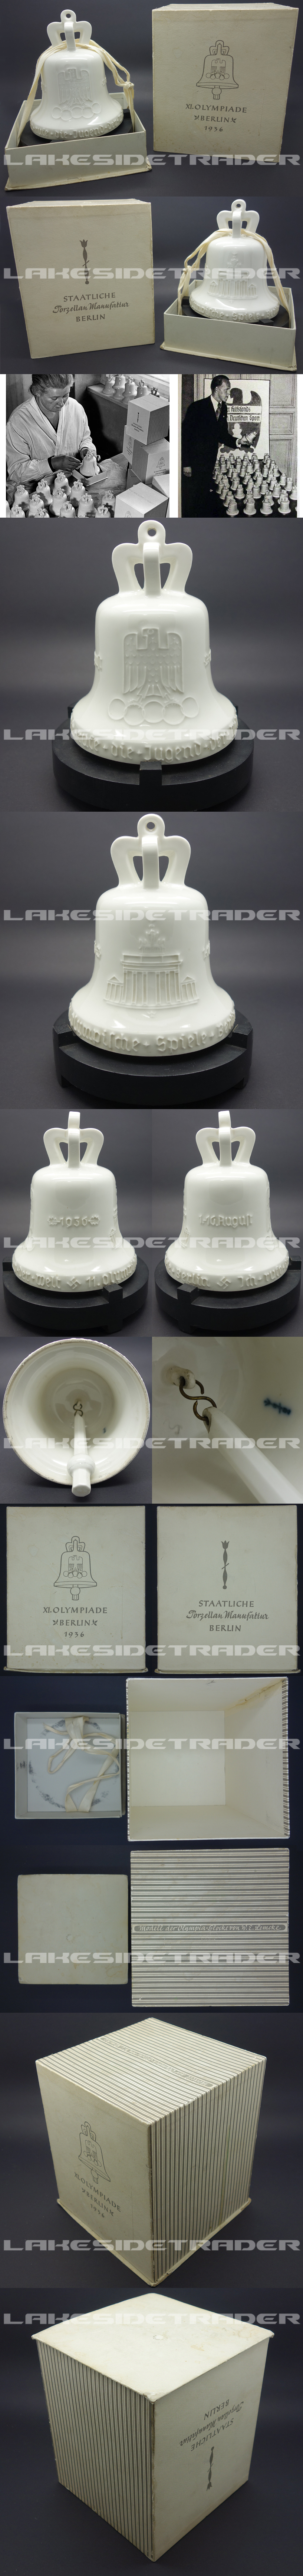 XI Olympic Games Porcelain Bell in Issue Case by KPM